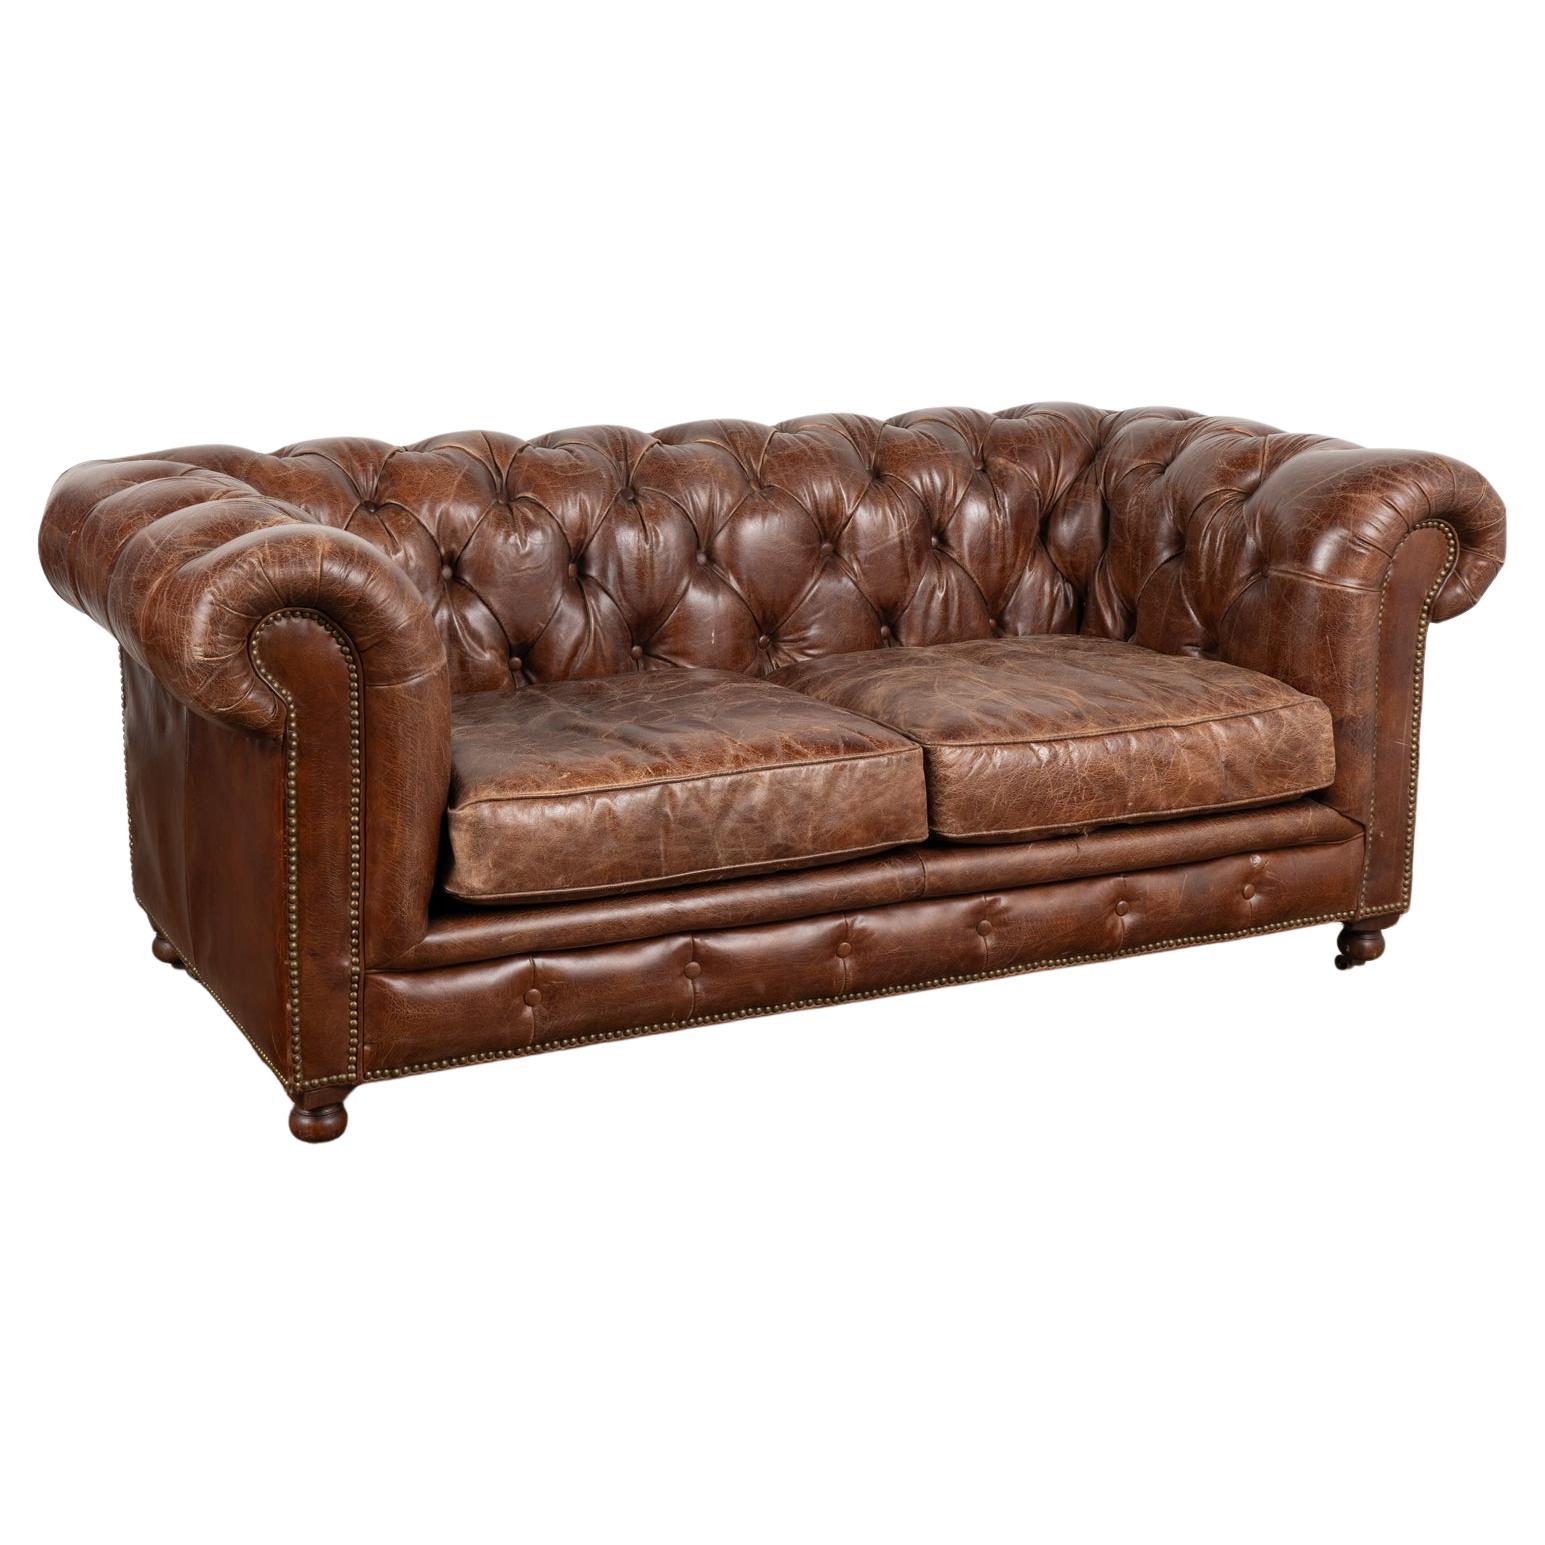 Vintage Brown Leather Chesterfield Two Seat Sofa Loveseat, England Circa 1960-80